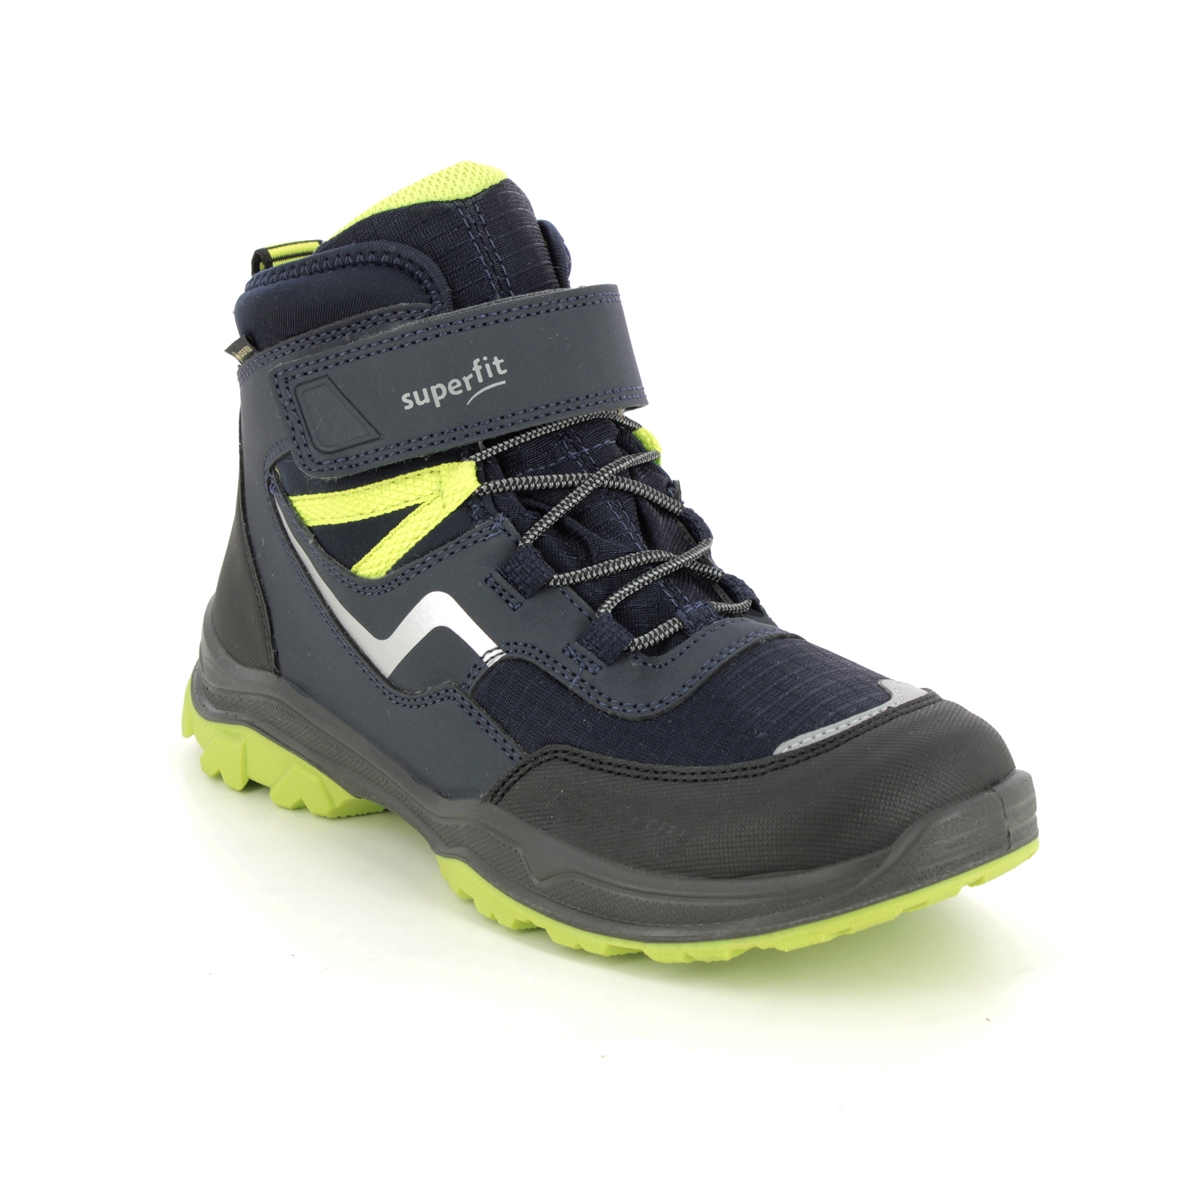 Superfit Jupiter Bungee Gtx Navy Lime Kids Boys Boots 1000074-8000 In Size 38 In Plain Navy Lime For kids